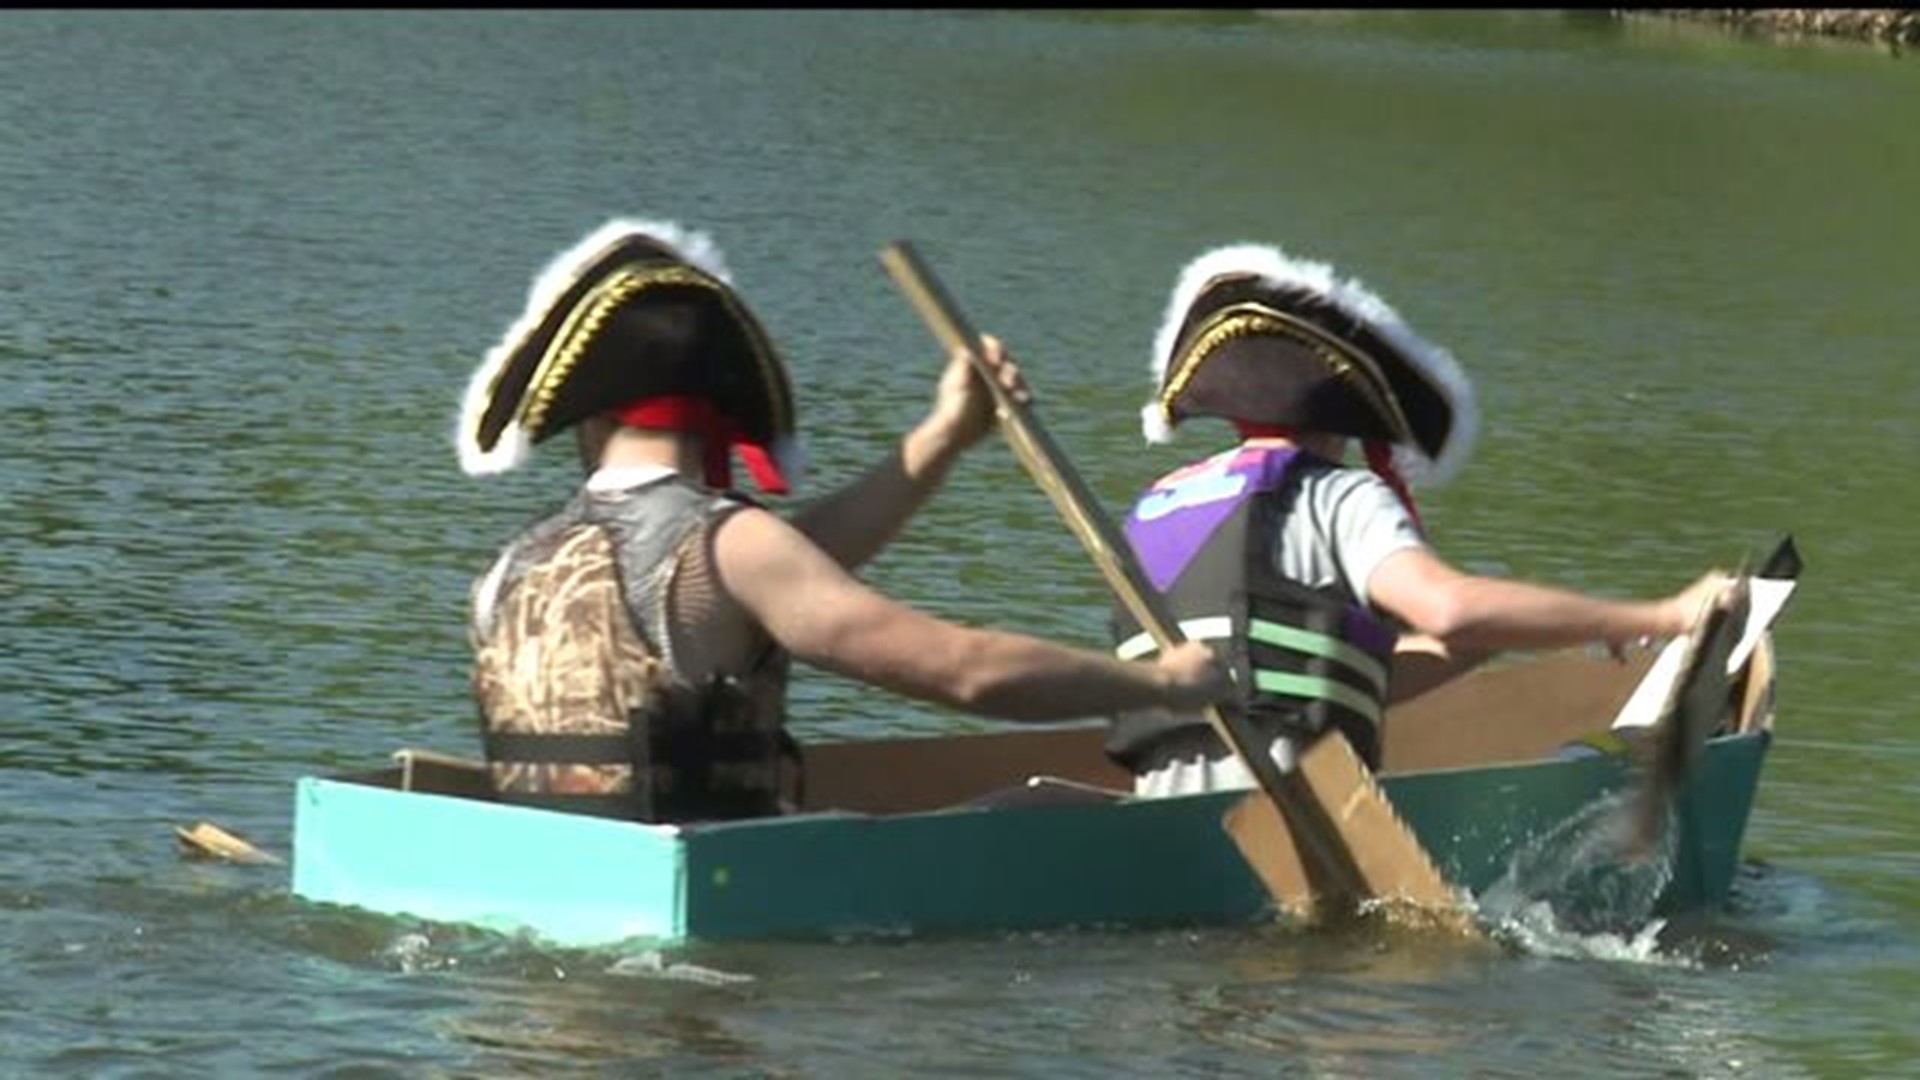 Students make watercrafts from cardboard